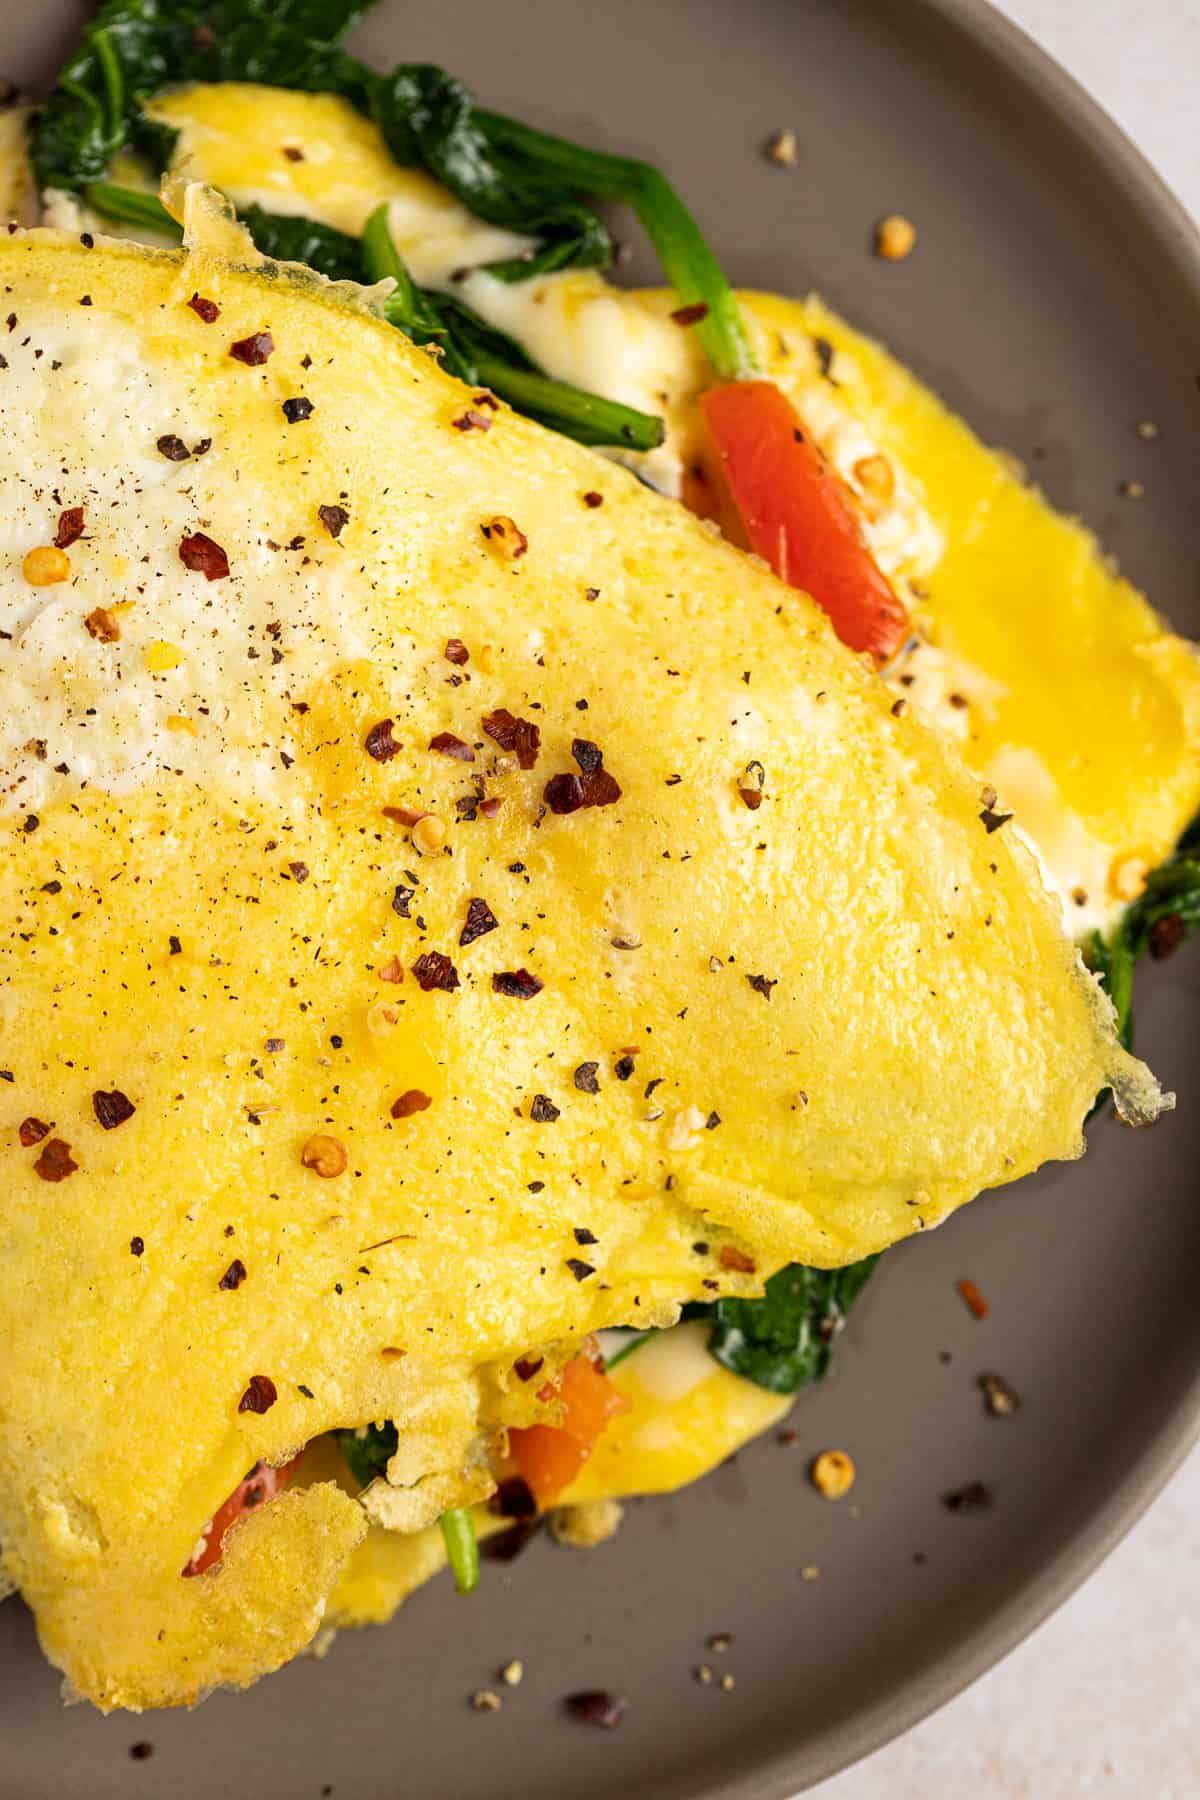 Up close view of a spinach & feta omelette topped with red pepper flakes.